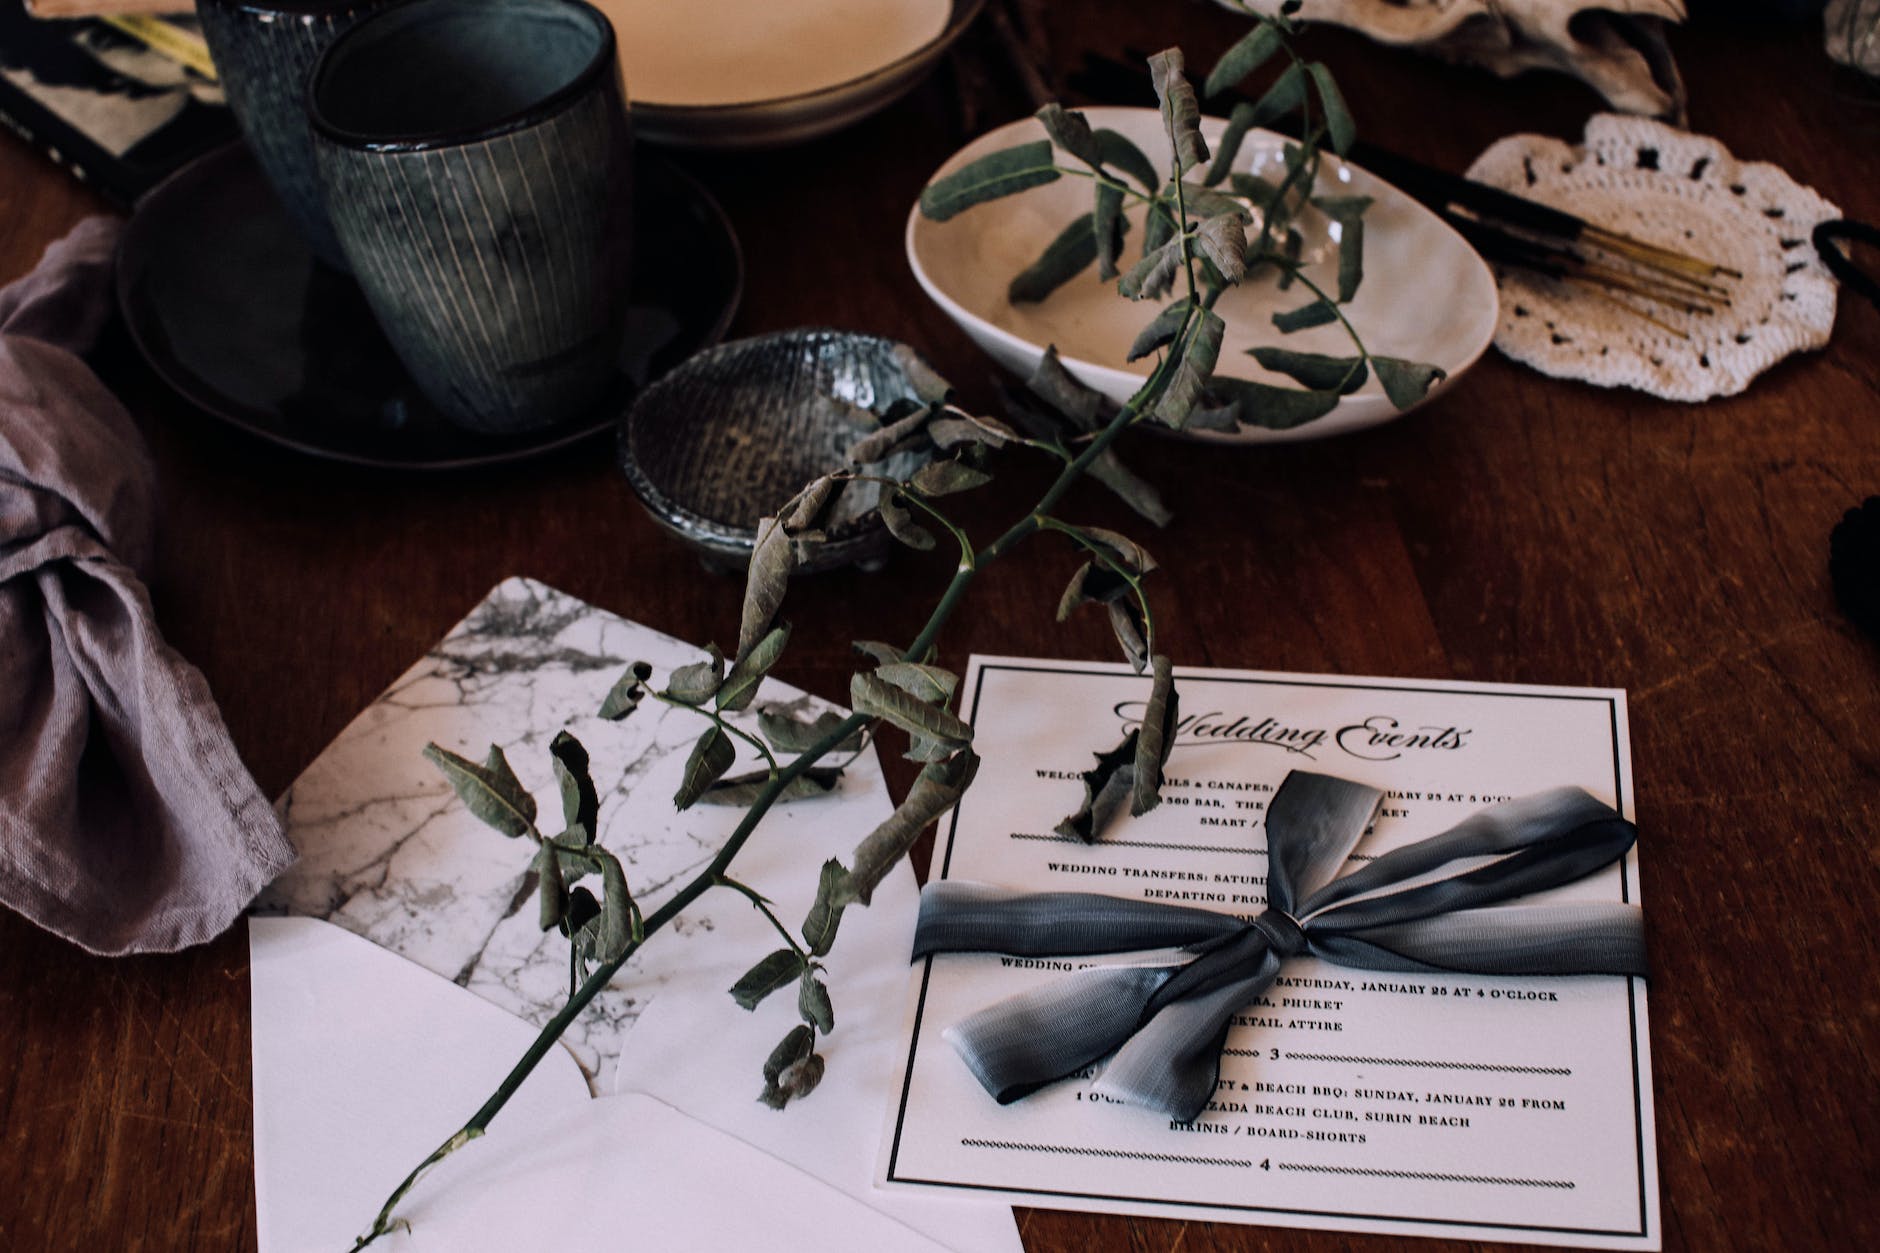 wedding invitation on table with utensil and decorations